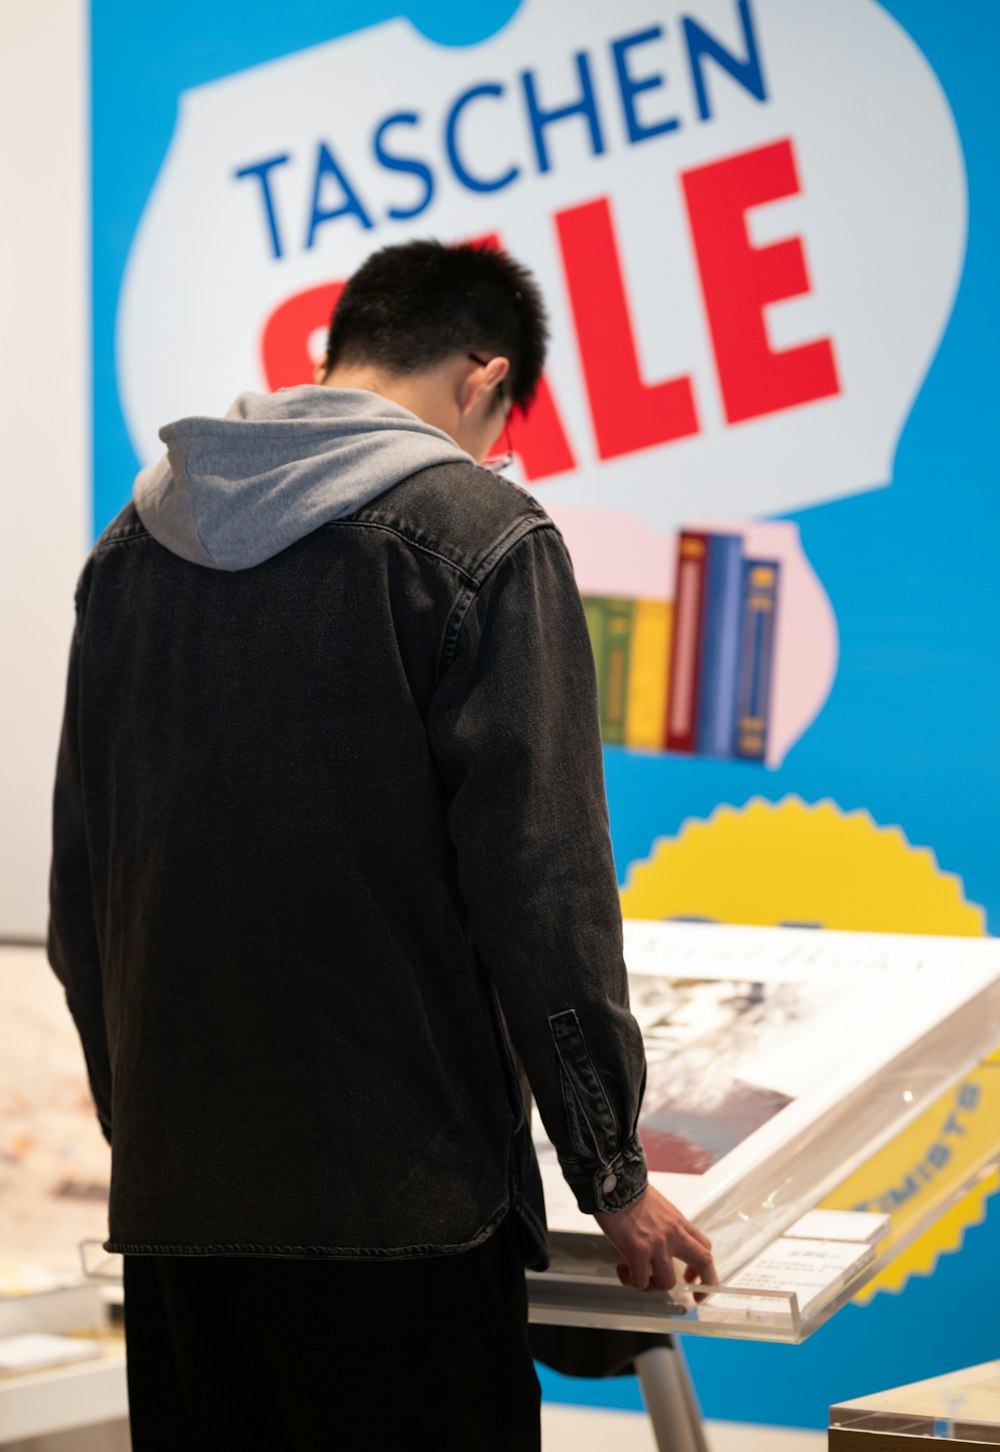 a man standing in front of a sign that says taschen sale